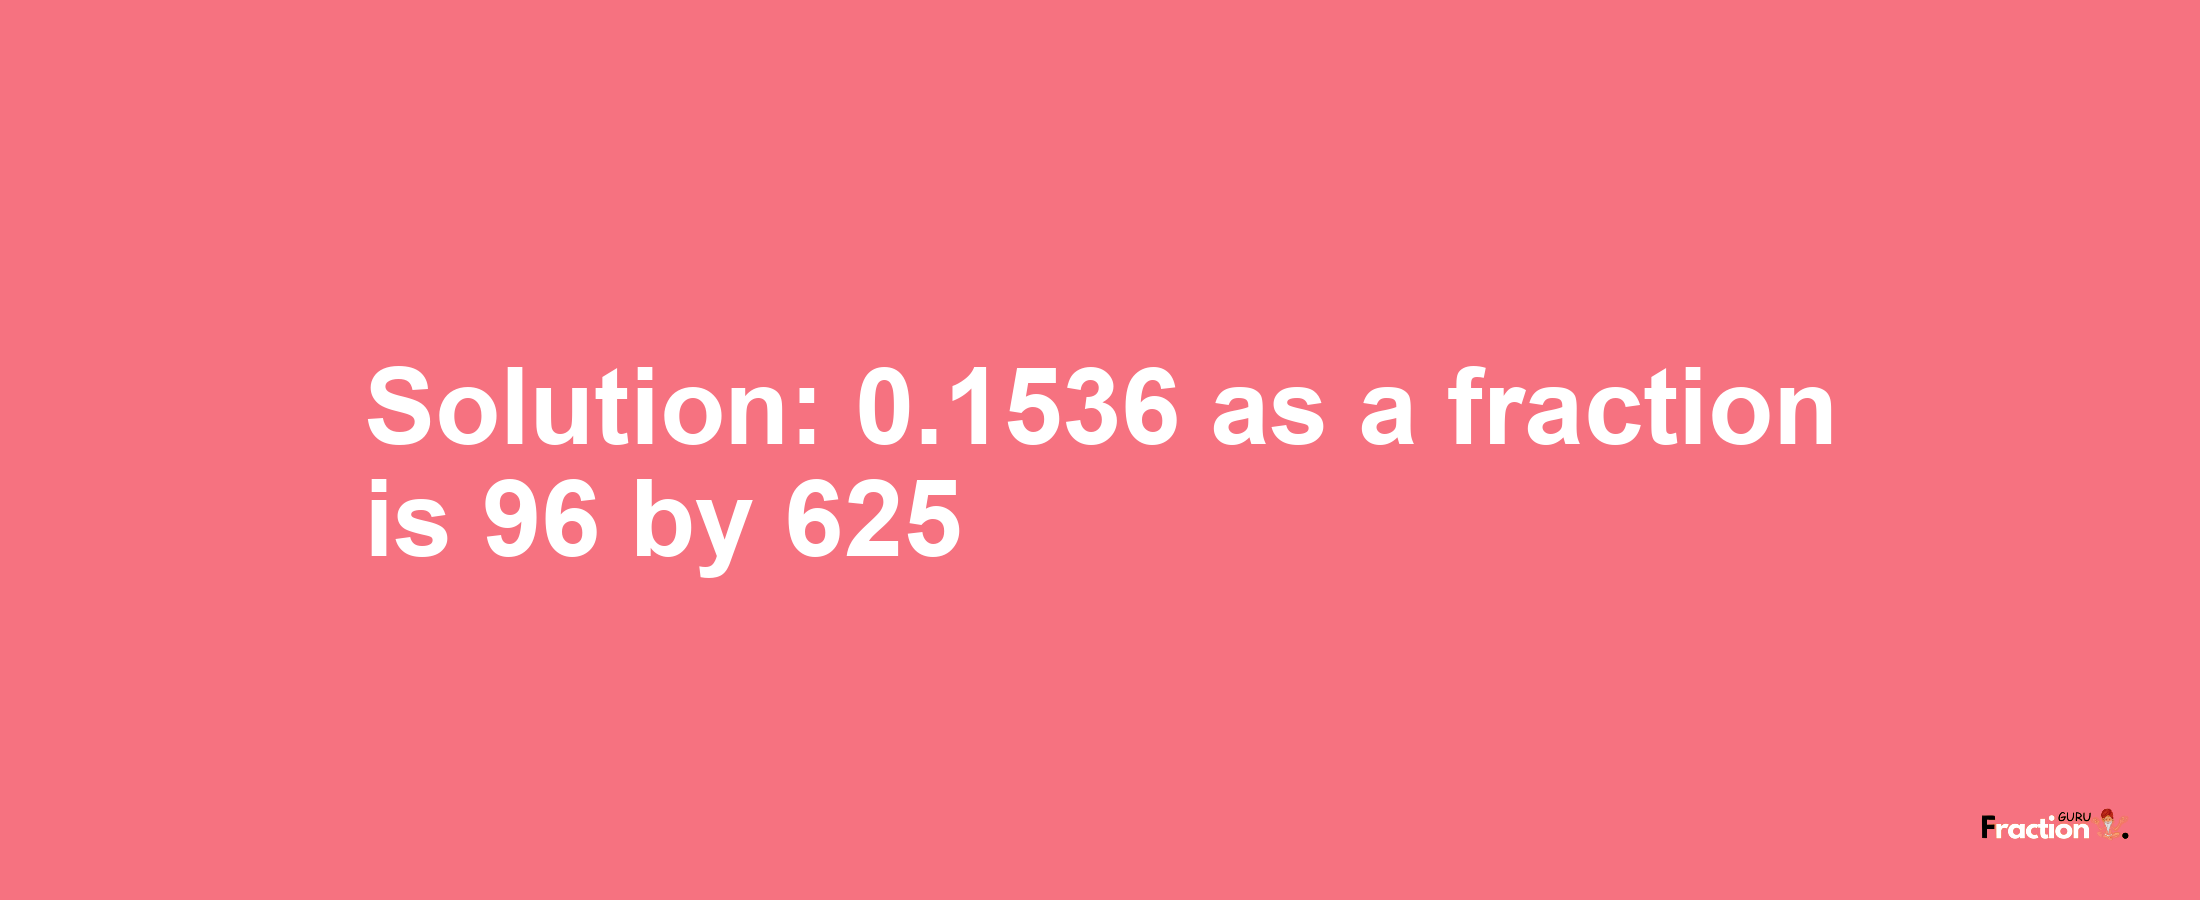 Solution:0.1536 as a fraction is 96/625